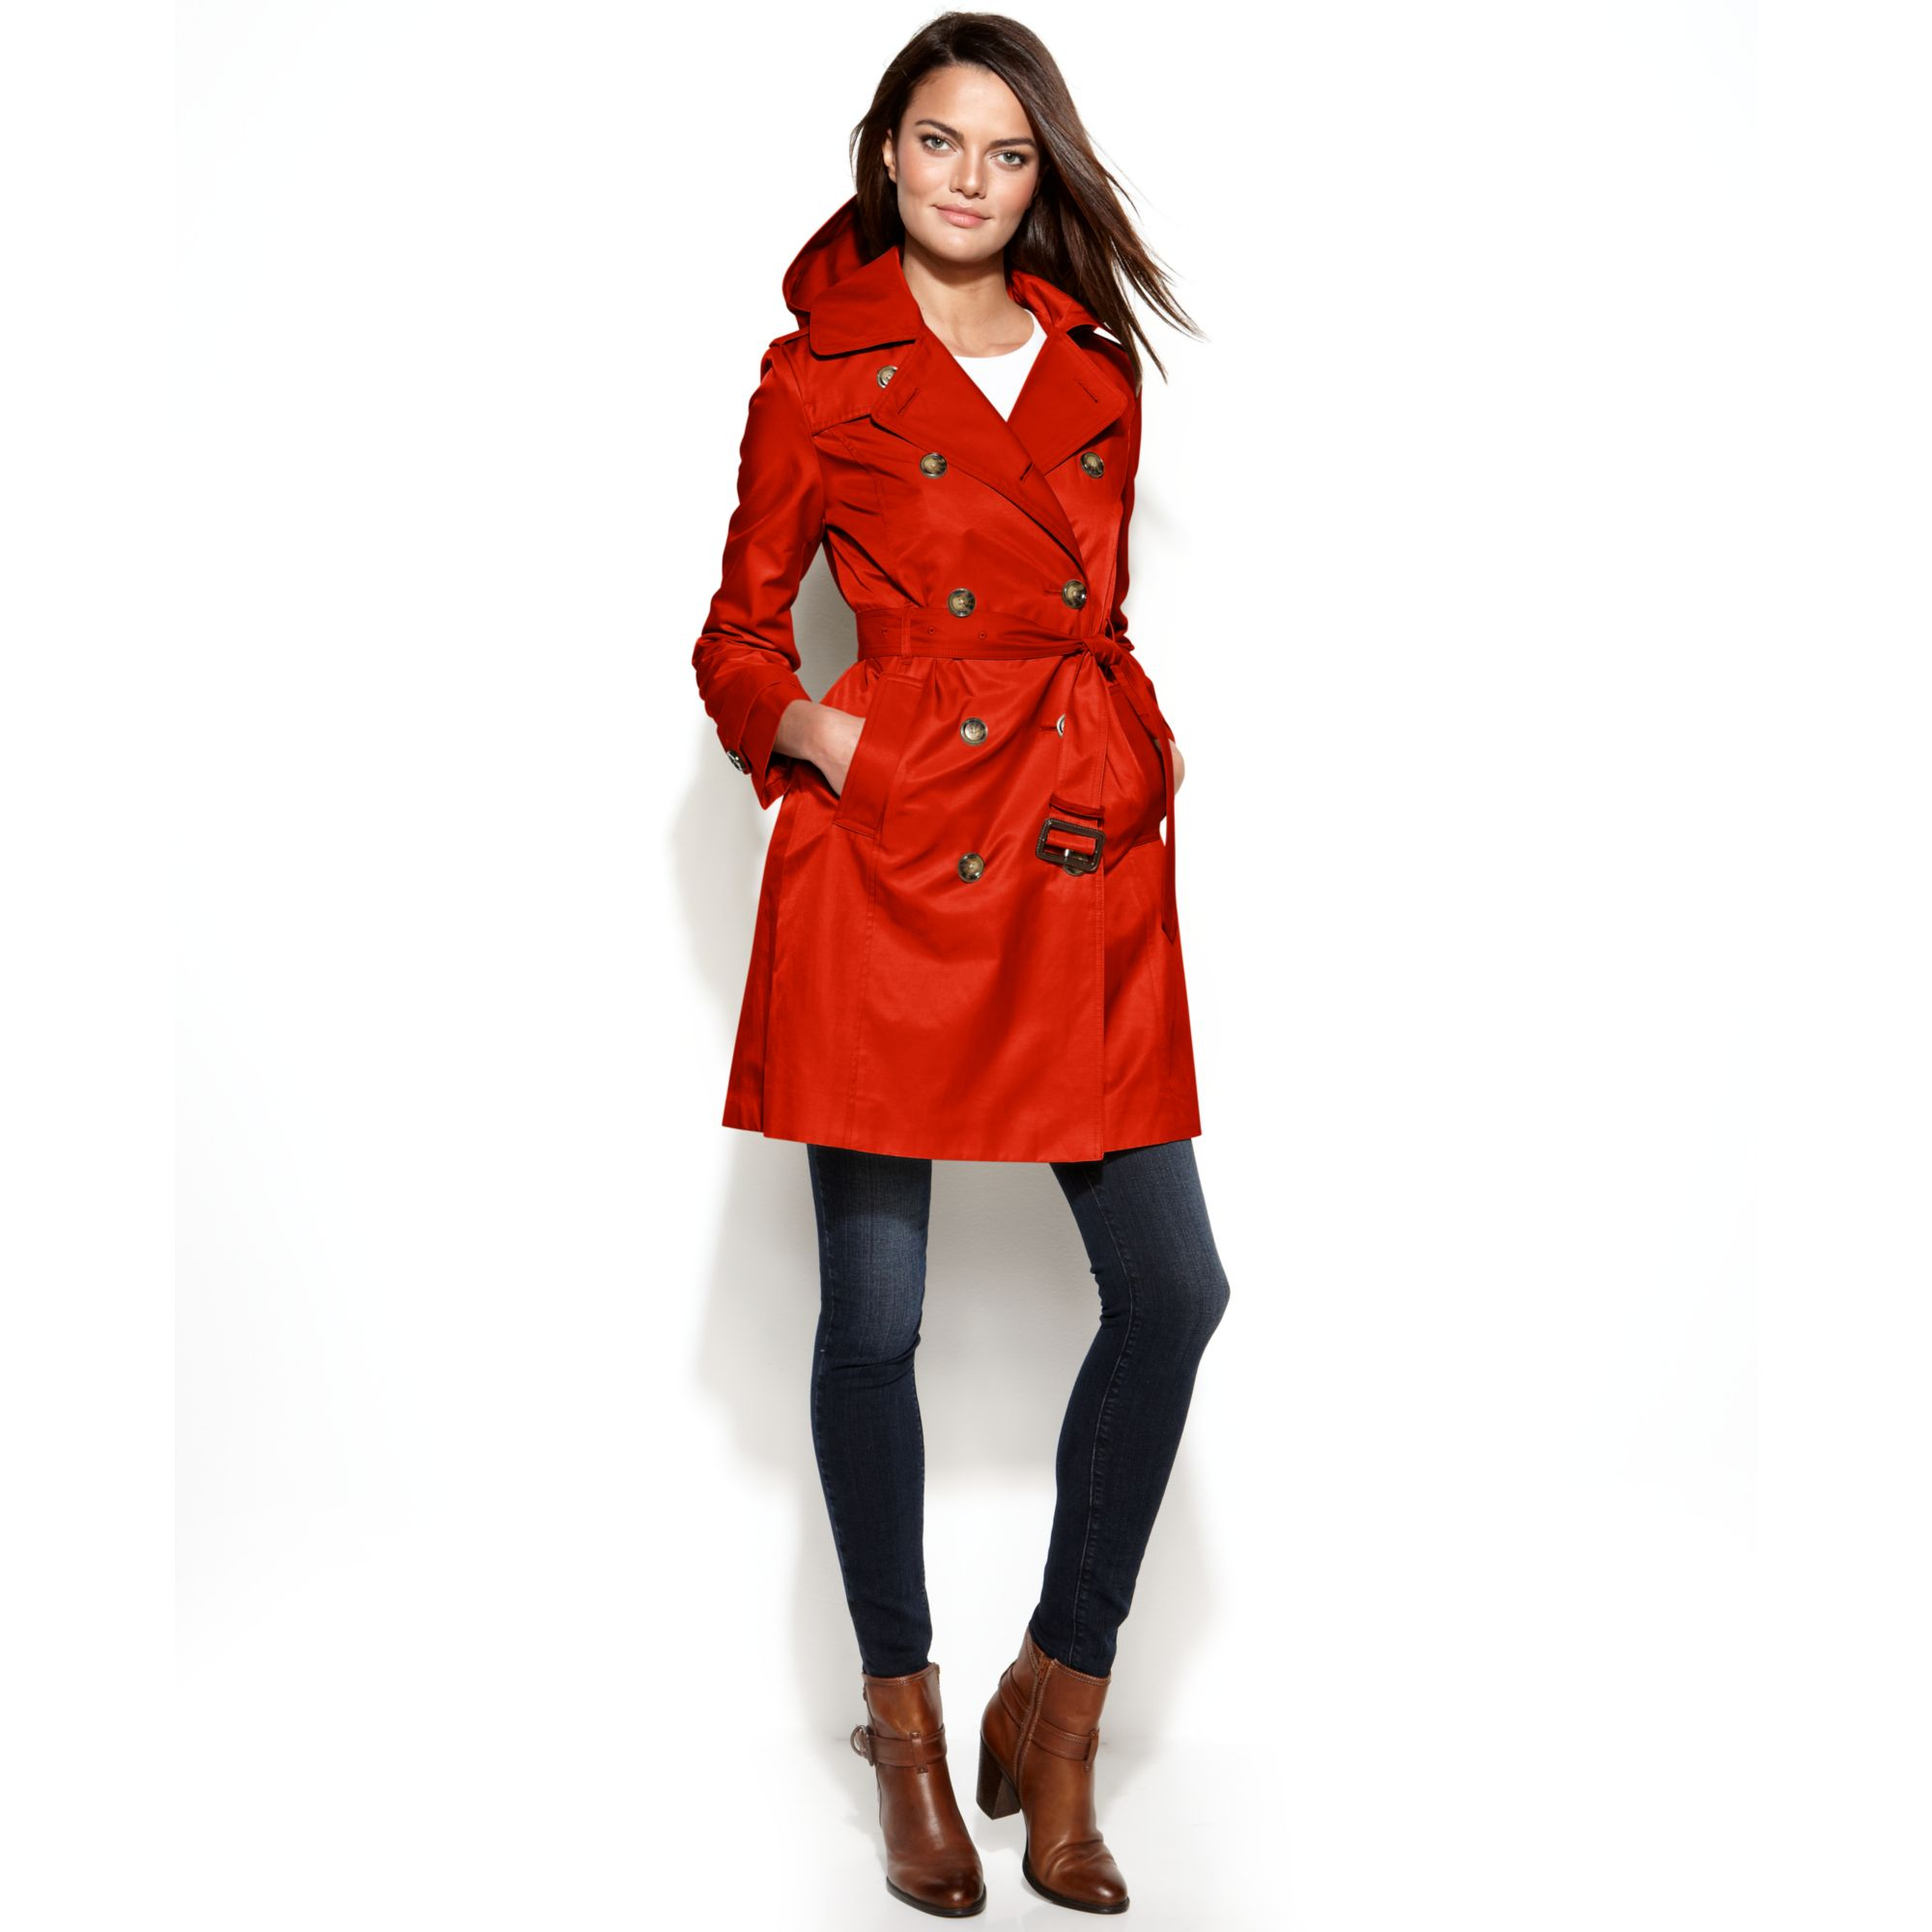 london-fog-red-all-weather-hooded-trench-coat-product-1-17006175-0-453597773-normal.jpeg